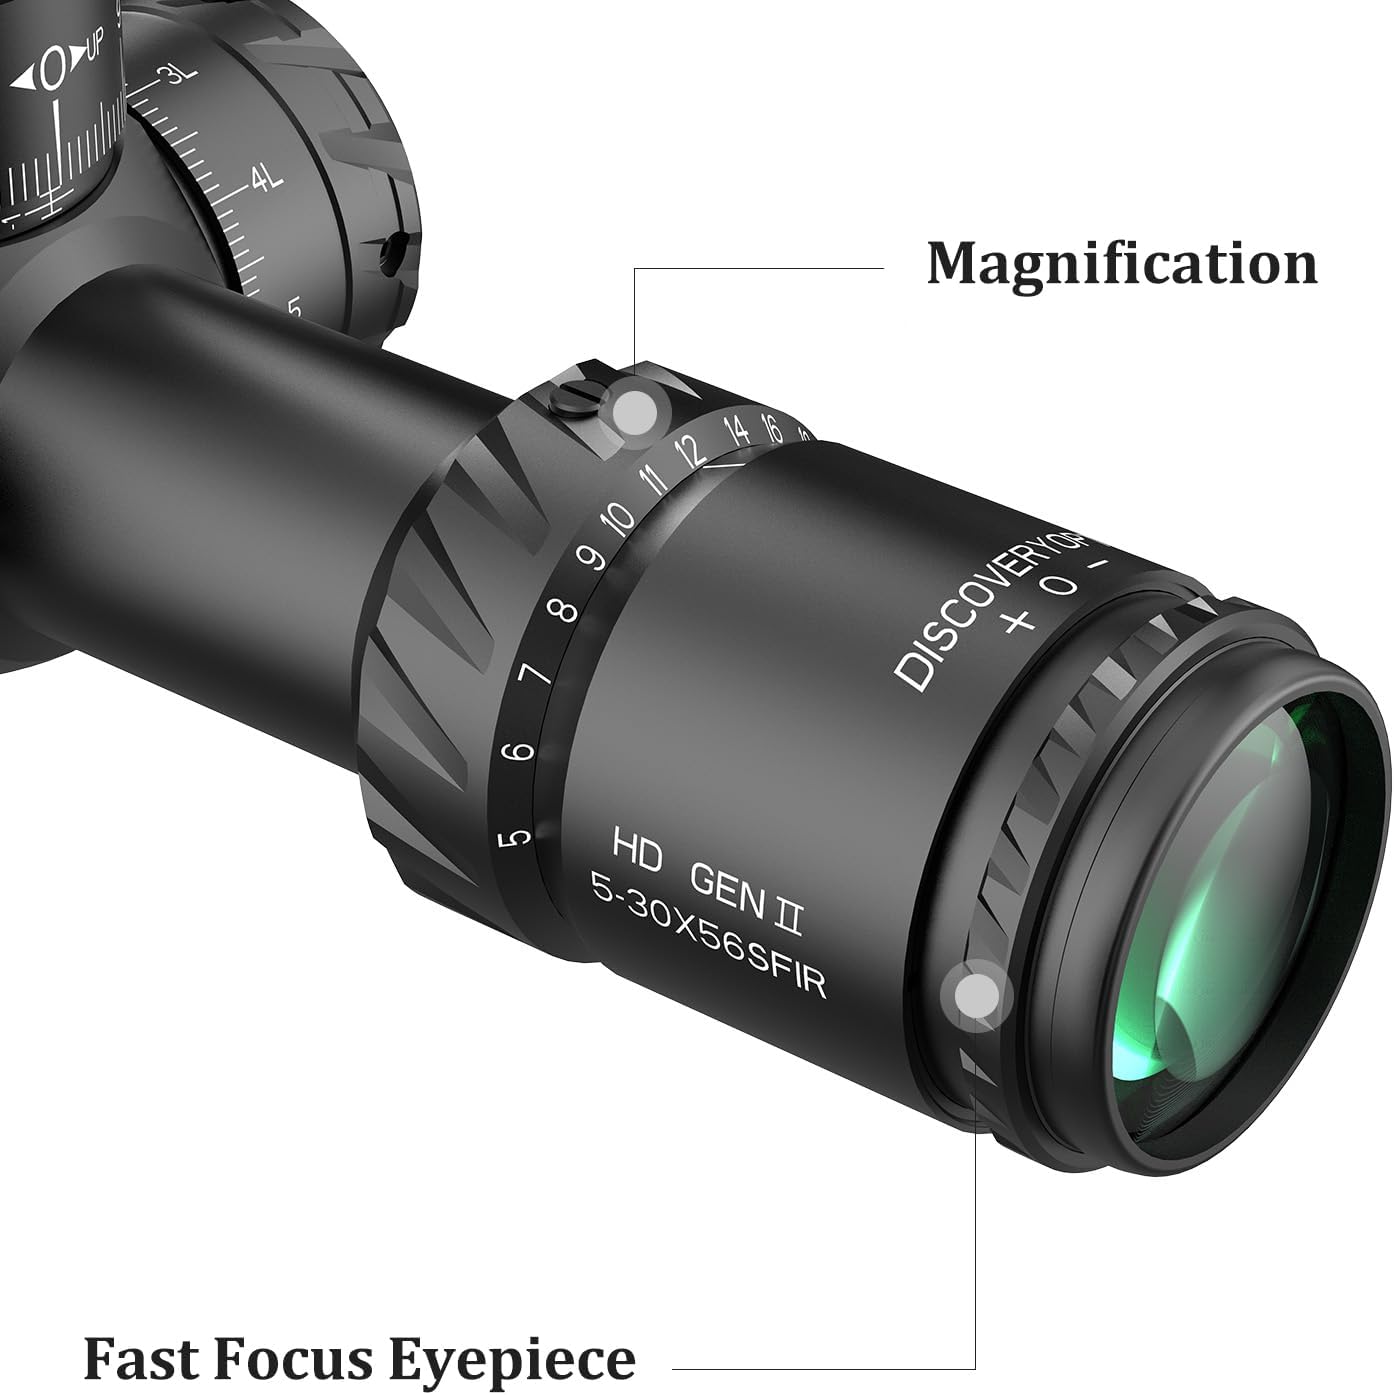 DISCOVERYOPT HD GEN-II 5-30x56 Rifle Optics, First Focal Plane, FFP Rifle Scope with Red Illuminated Reticle, Zero Stop 34mm Tube, Long Range RifleScopes for Hunting and Precision Shooting… - DISCOVERYOPT HD Rifle Scope Review